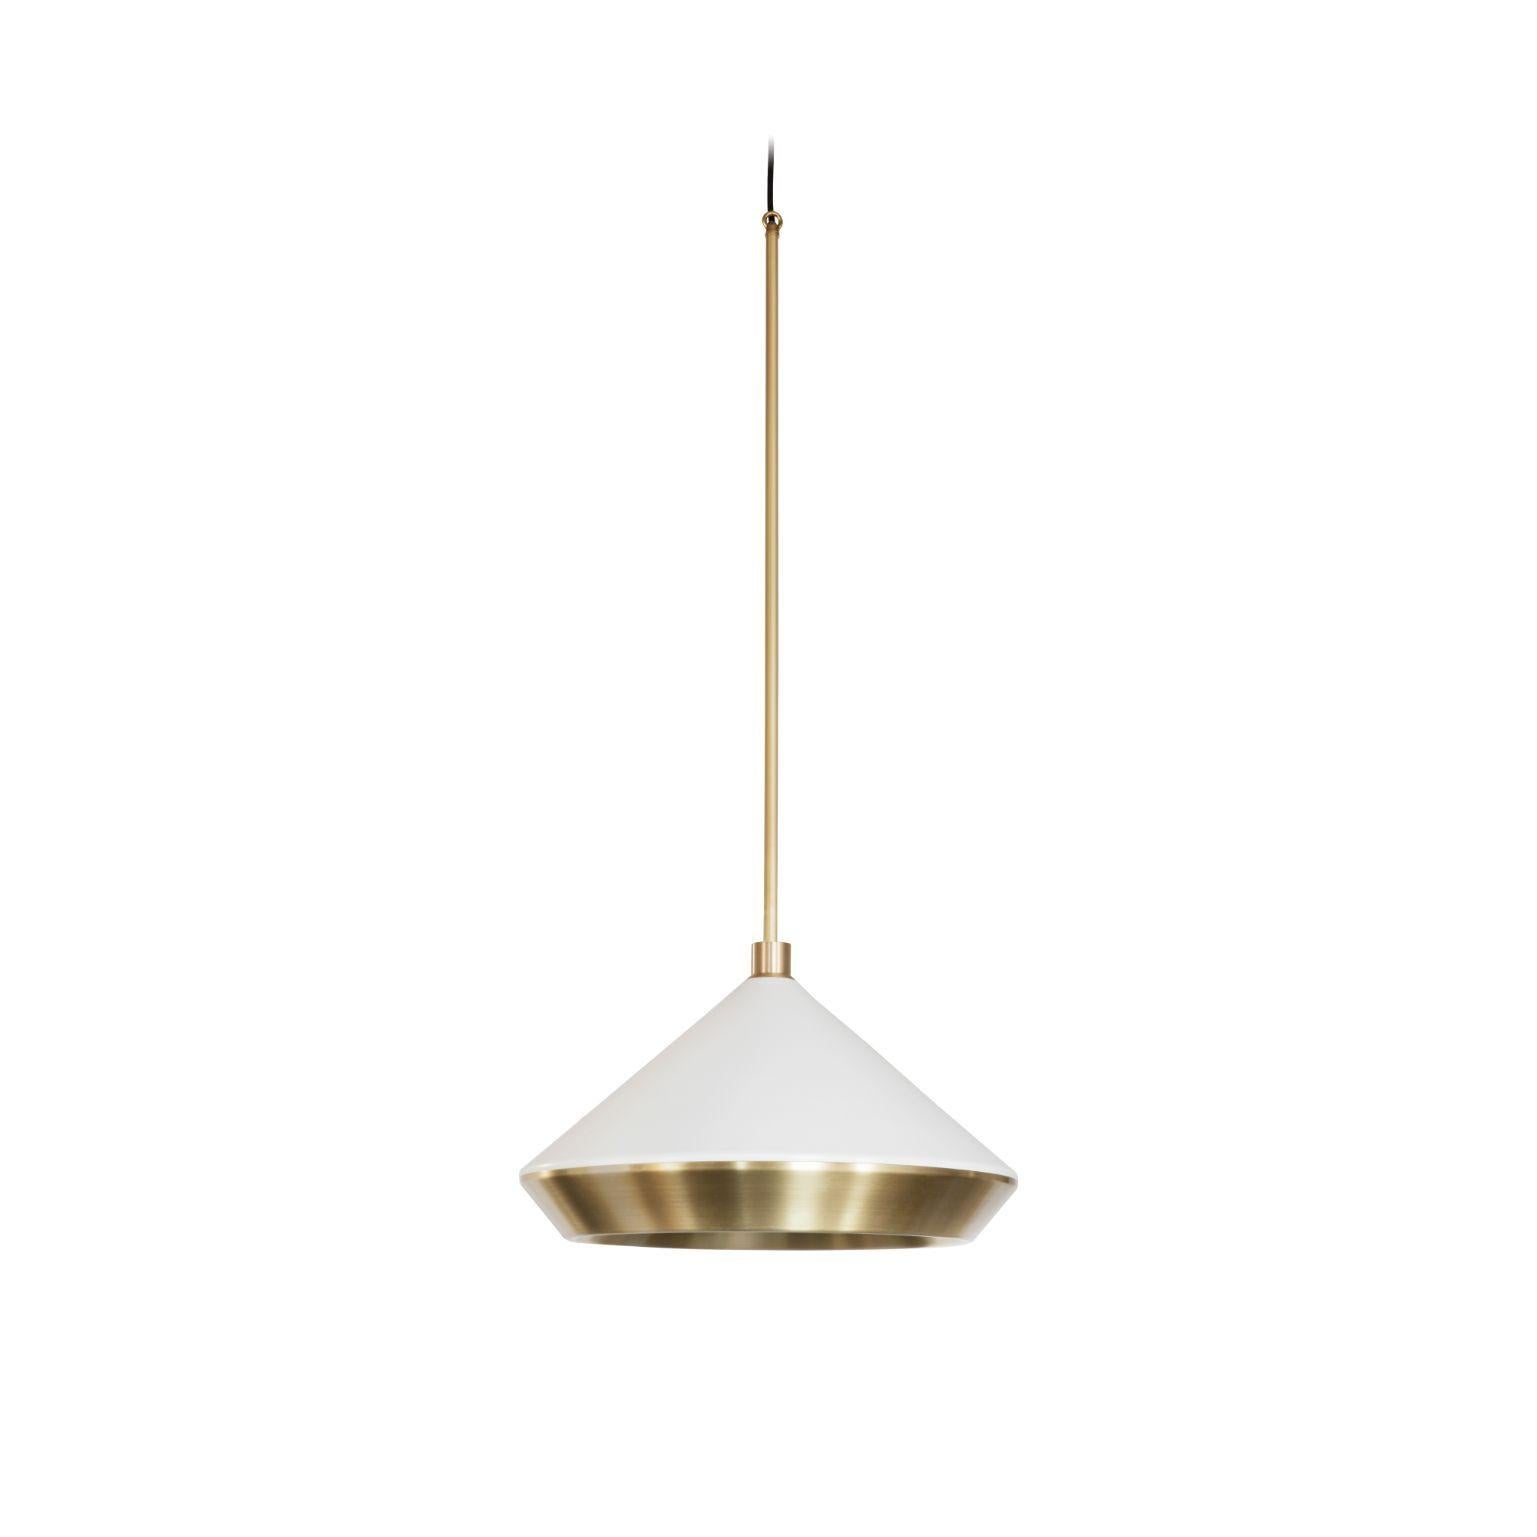 Shear pendant light XL - brass - white by Bert Frank
Dimensions: 30 x 50 cm
Materials: Brass

When Adam Yeats and Robbie Llewellyn founded Bert Frank in 2013 it was a meeting of minds and the start of a collaborative creative partnership with